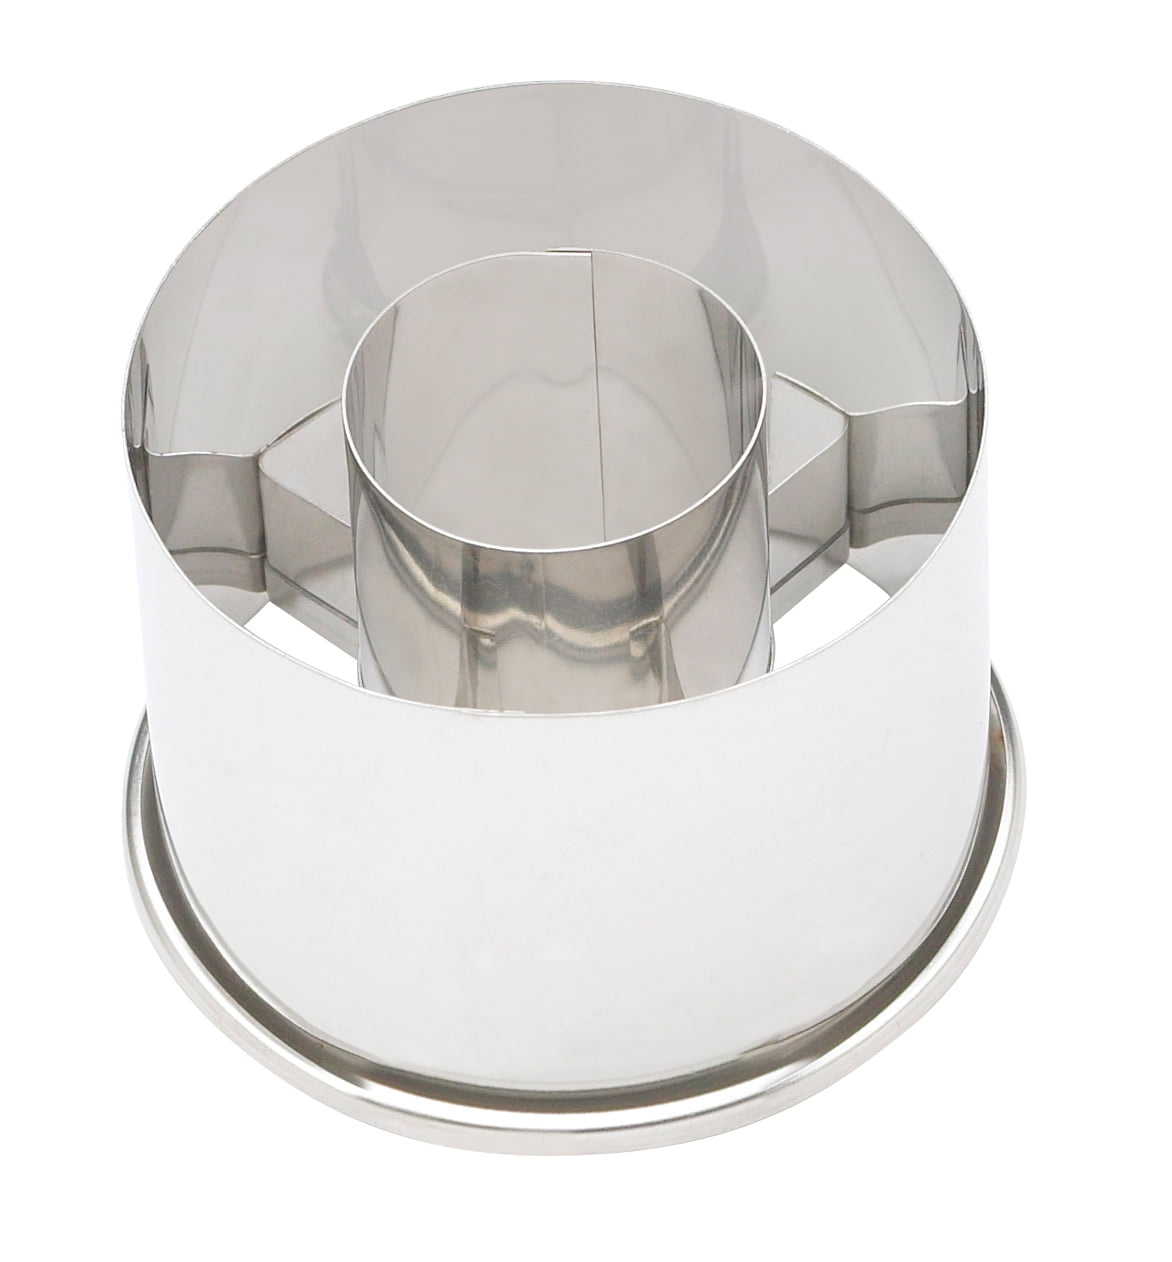 FREE SHIPPING *NEW* WINCO CC-2 STAINLESS STEEL 3" DOUGHNUT DONUT CUTTER 